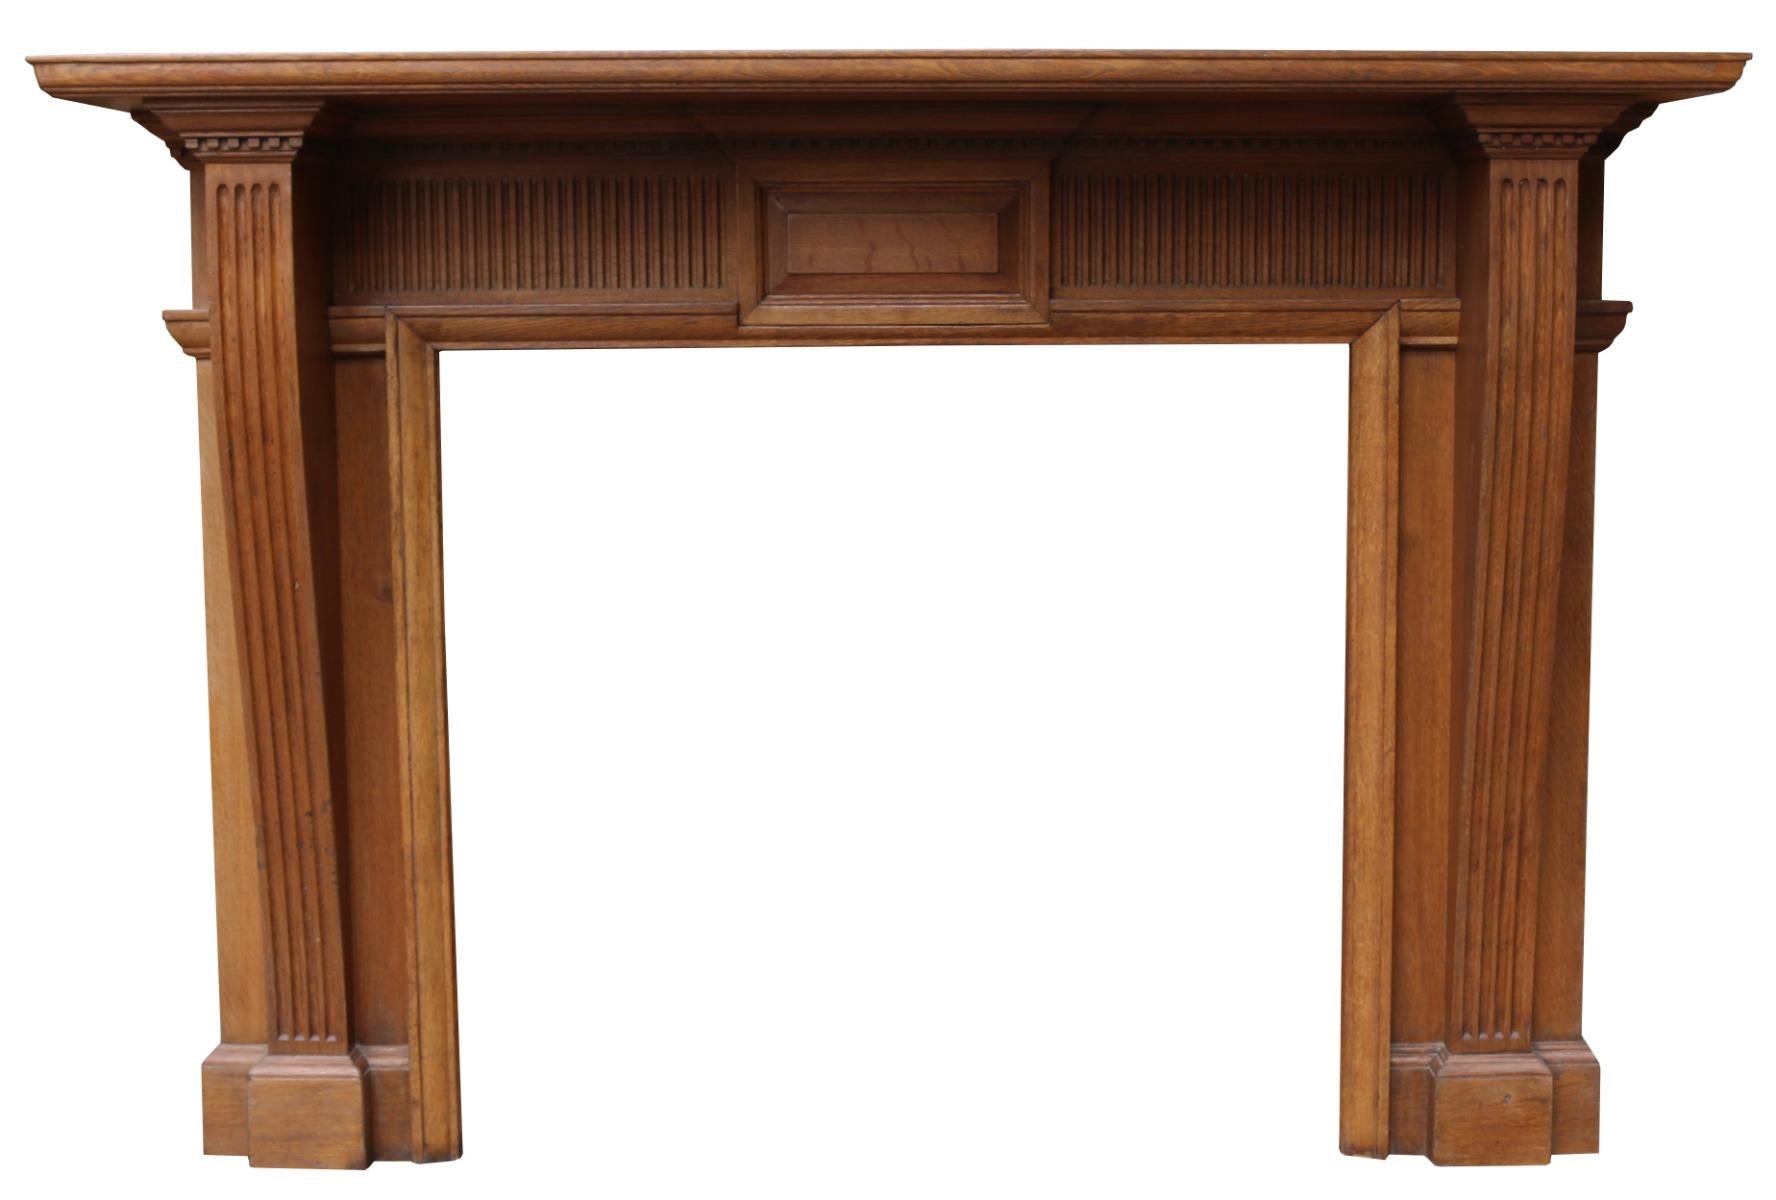 With fluted corbel jambs, paneled and fluted frieze.

Additional Dimensions

Opening Height 96 cm

Opening Width 105 cm

Width between outside of legs 168 cm.